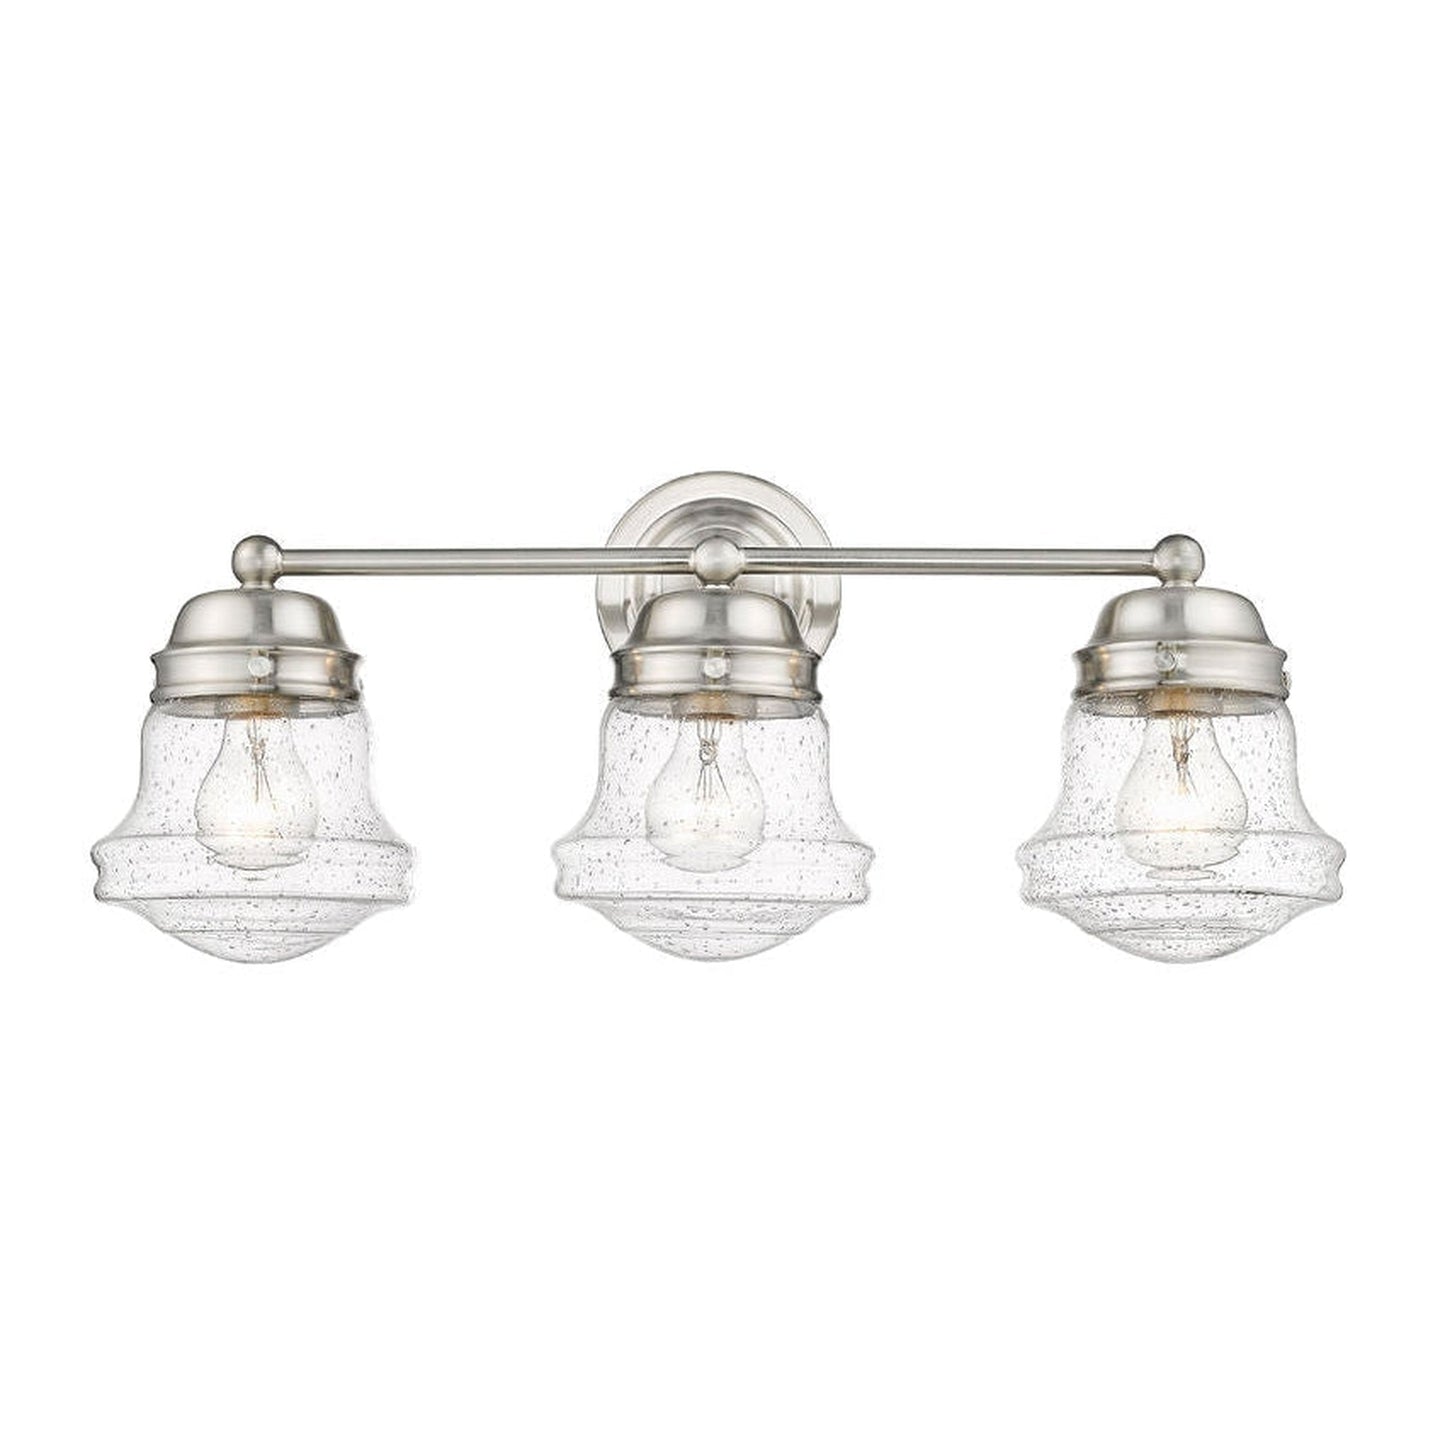 Z-Lite Vaughn 23" 3-Light Brushed Nickel Vanity Light With Clear Seedy Glass Shade